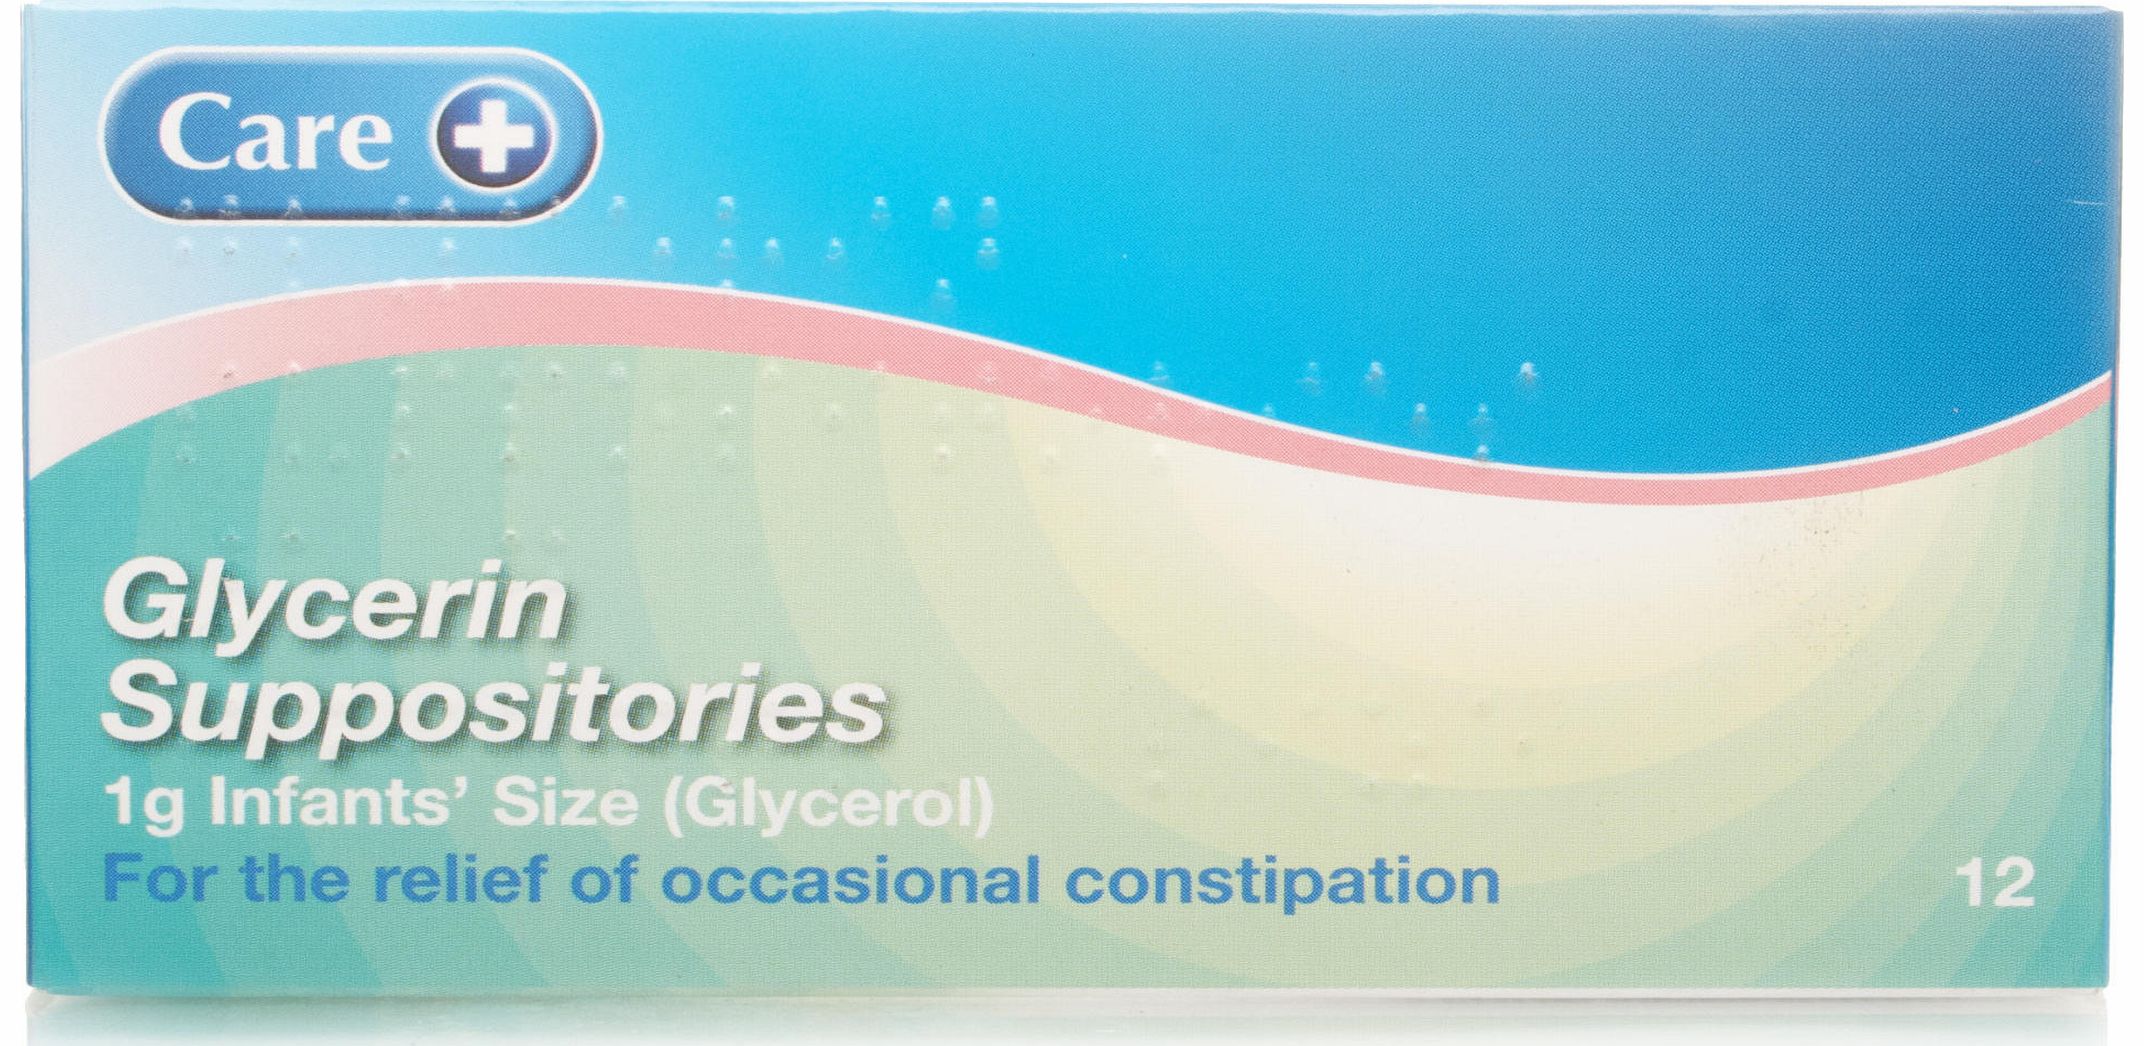 Glycerin (Glycerol) Suppositories BP 1g Infants is an easy and effective way to provide your baby with relief from constipation and works by encouraging bowel movement- helping to relieve any pain or discomfort they might feel due to not being able t